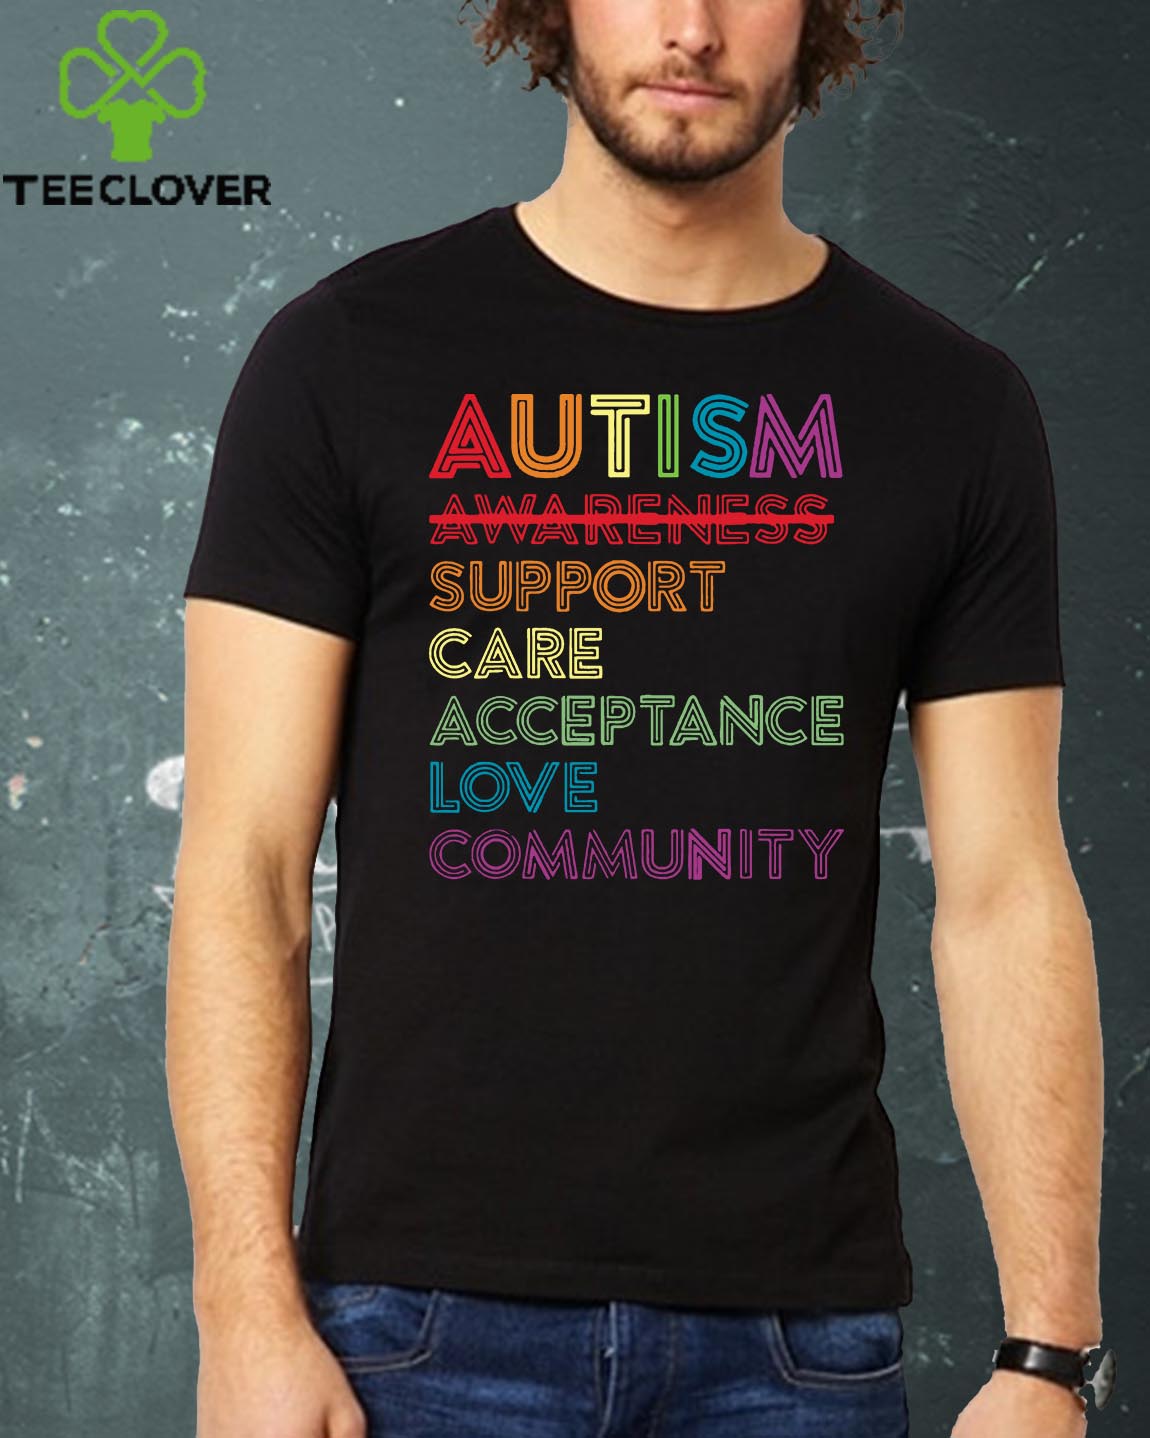 Autism awareness support care acceptance love community